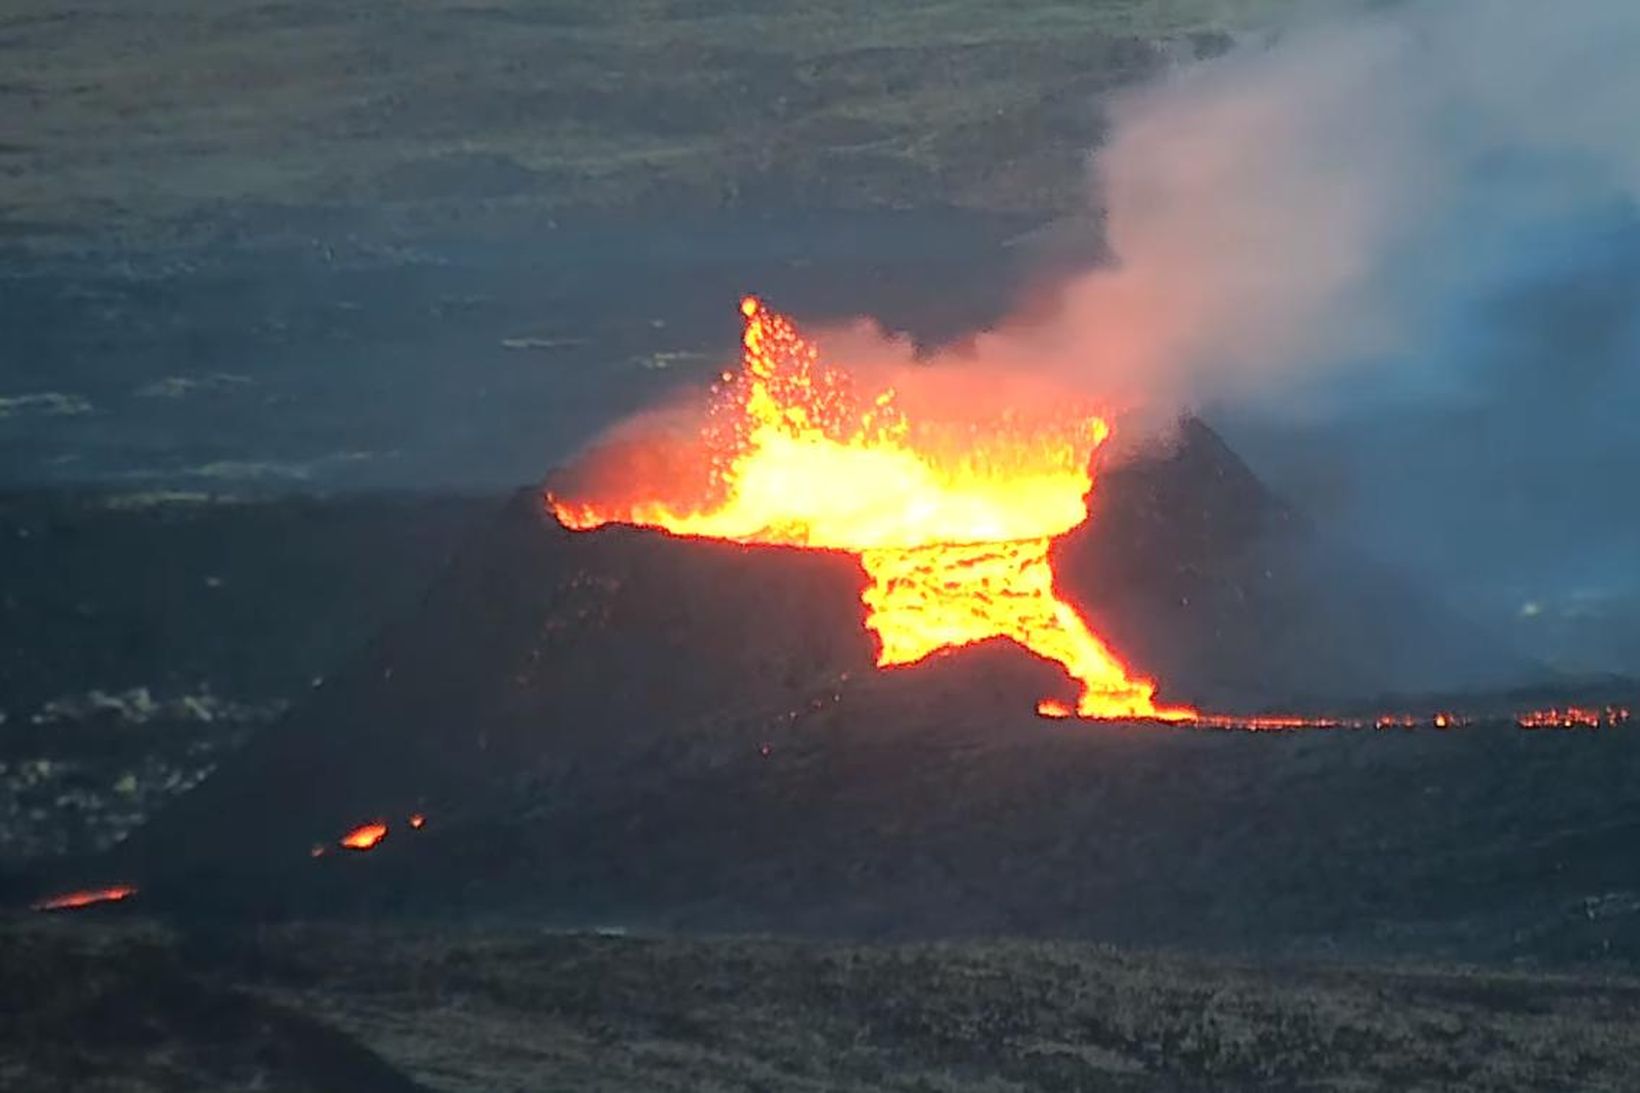 Screenshot from webcam at 20:30. Lava flows over the rim of the crater.